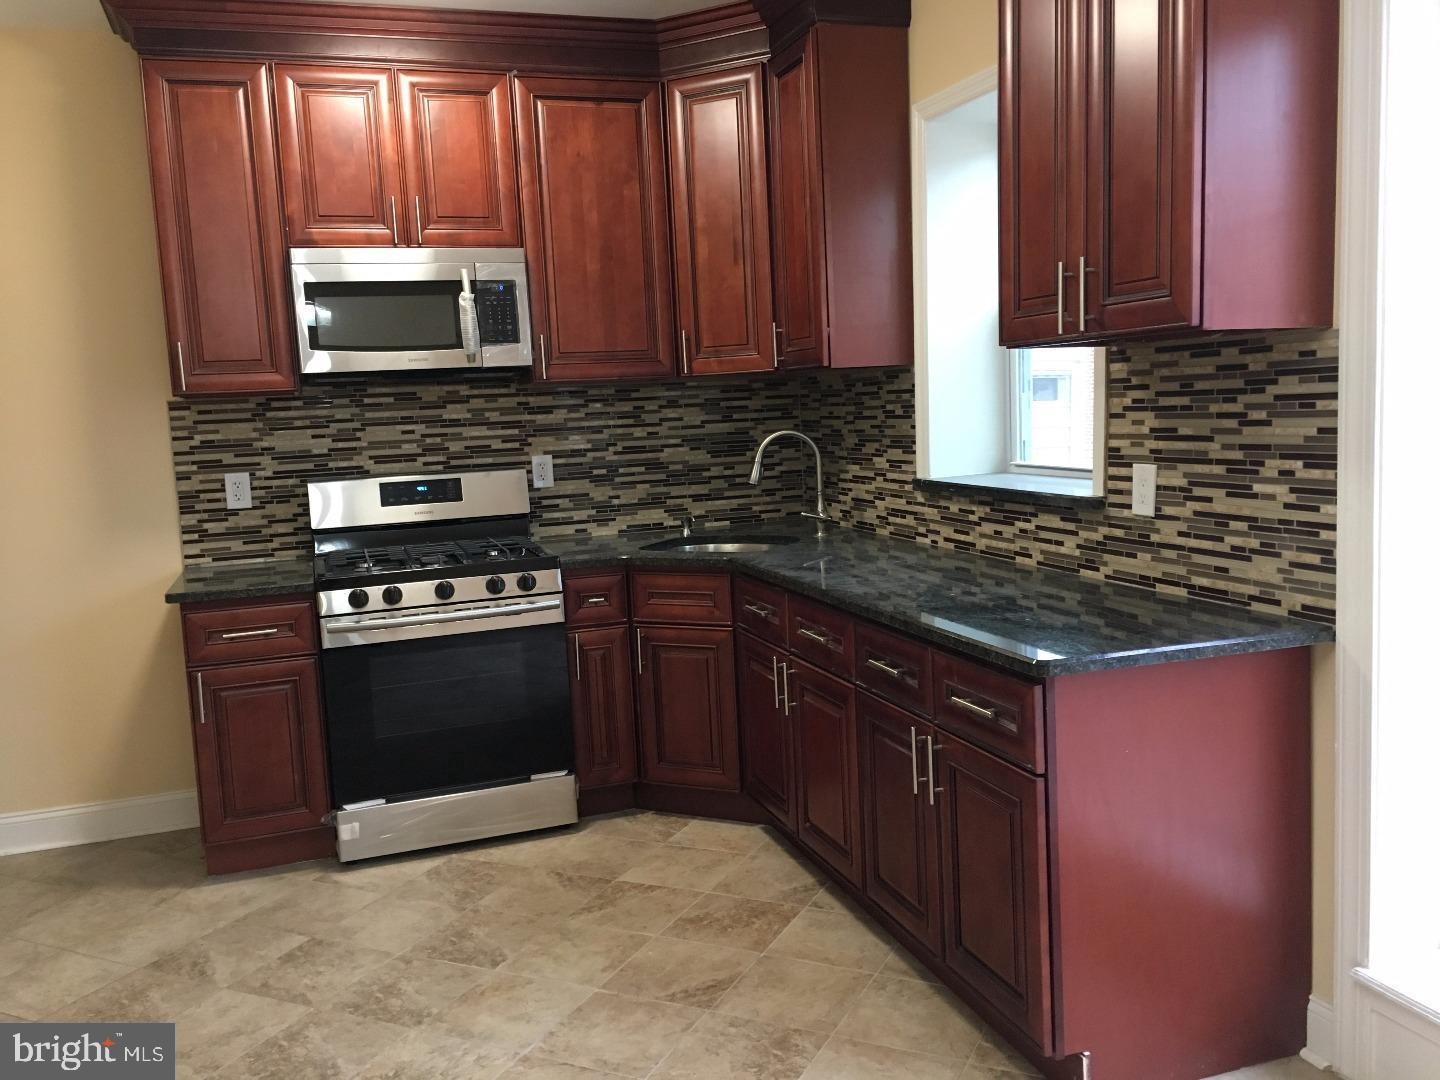 a kitchen with stainless steel appliances granite countertop wooden cabinets a stove top oven with a sink and dishwasher